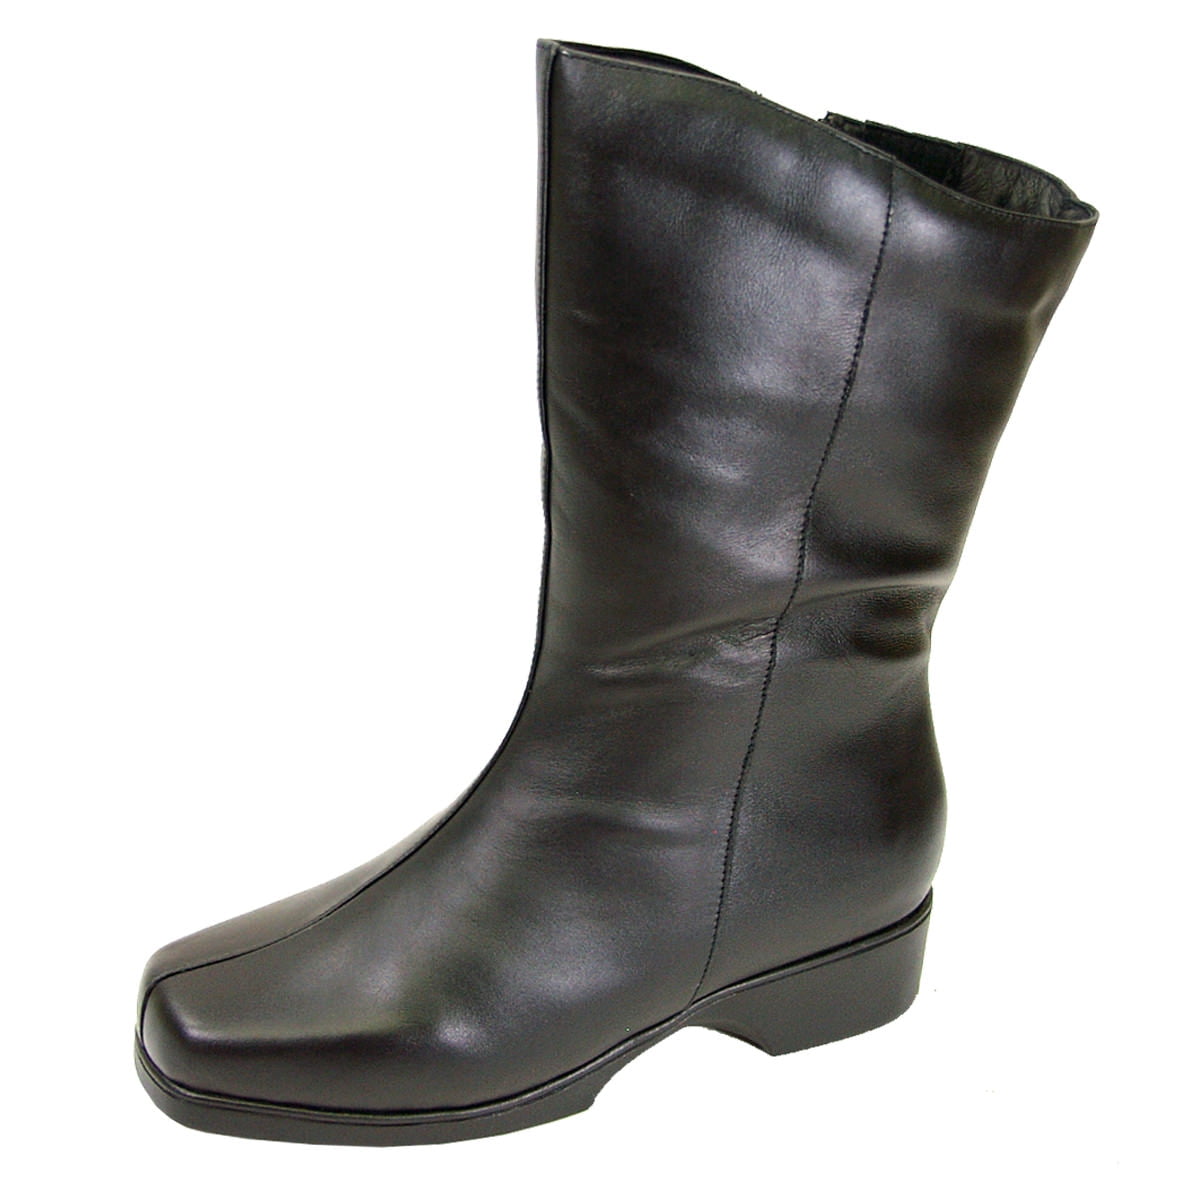 wide width mid calf boots